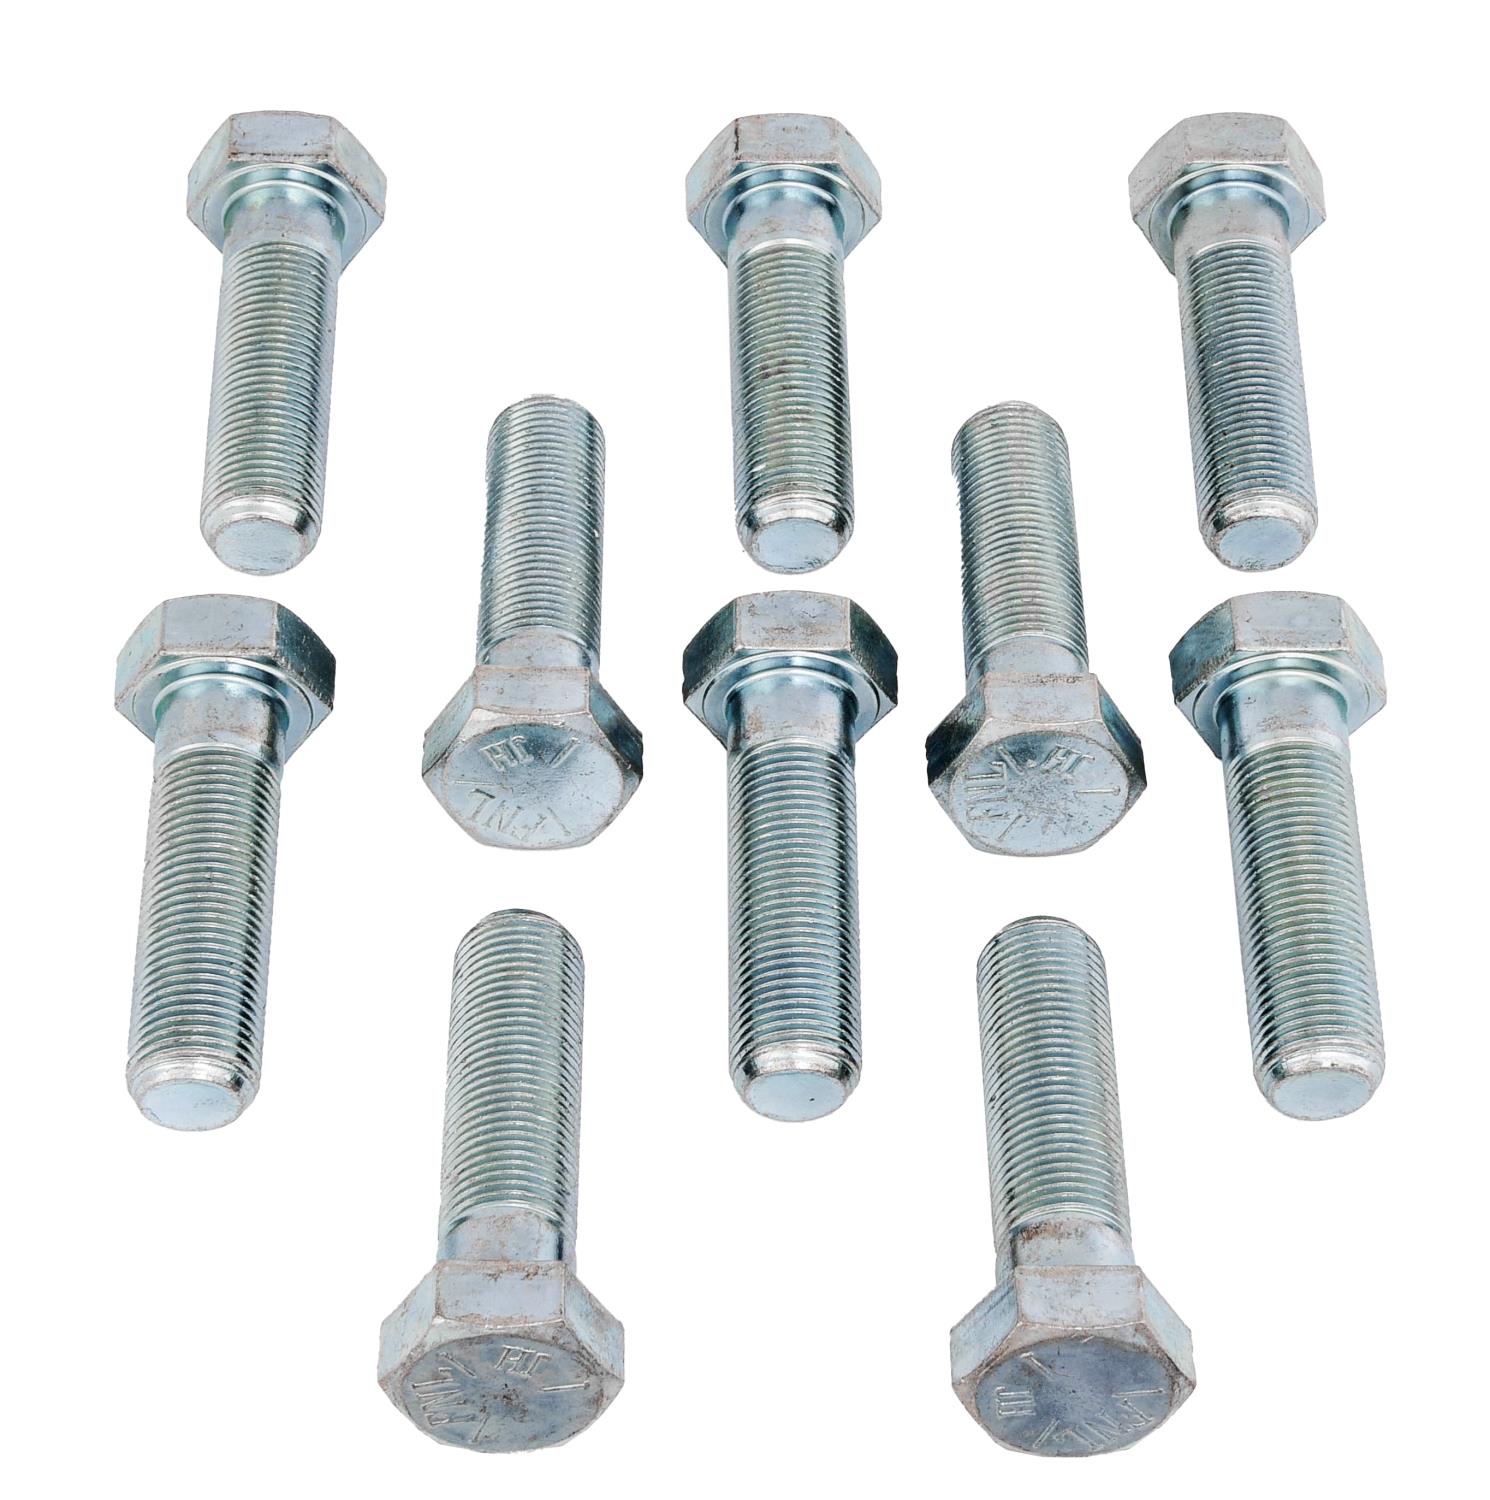 JEGS 555-83230: Hex Head Bolts 5/8 in.-18 x 1/4 in. UHL 5/16 in.  Thread Length Grade-5 15/16 in. 6-Point Hex Head Zinc Plated Carbon  Steel Set of 10 JEGS